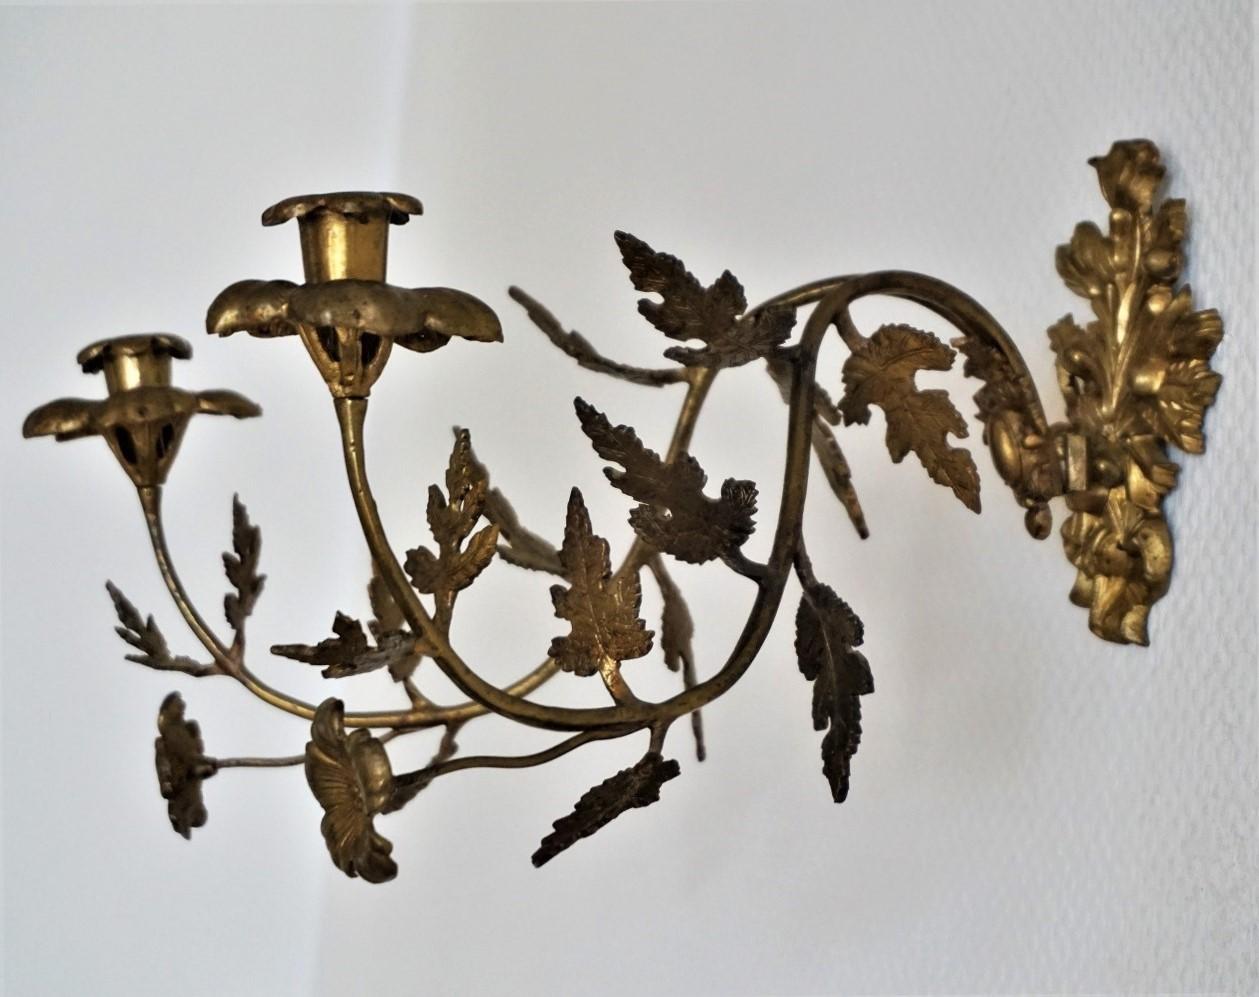 Gilt Pair of French Bronze Wall Sconces, Late 19th Century